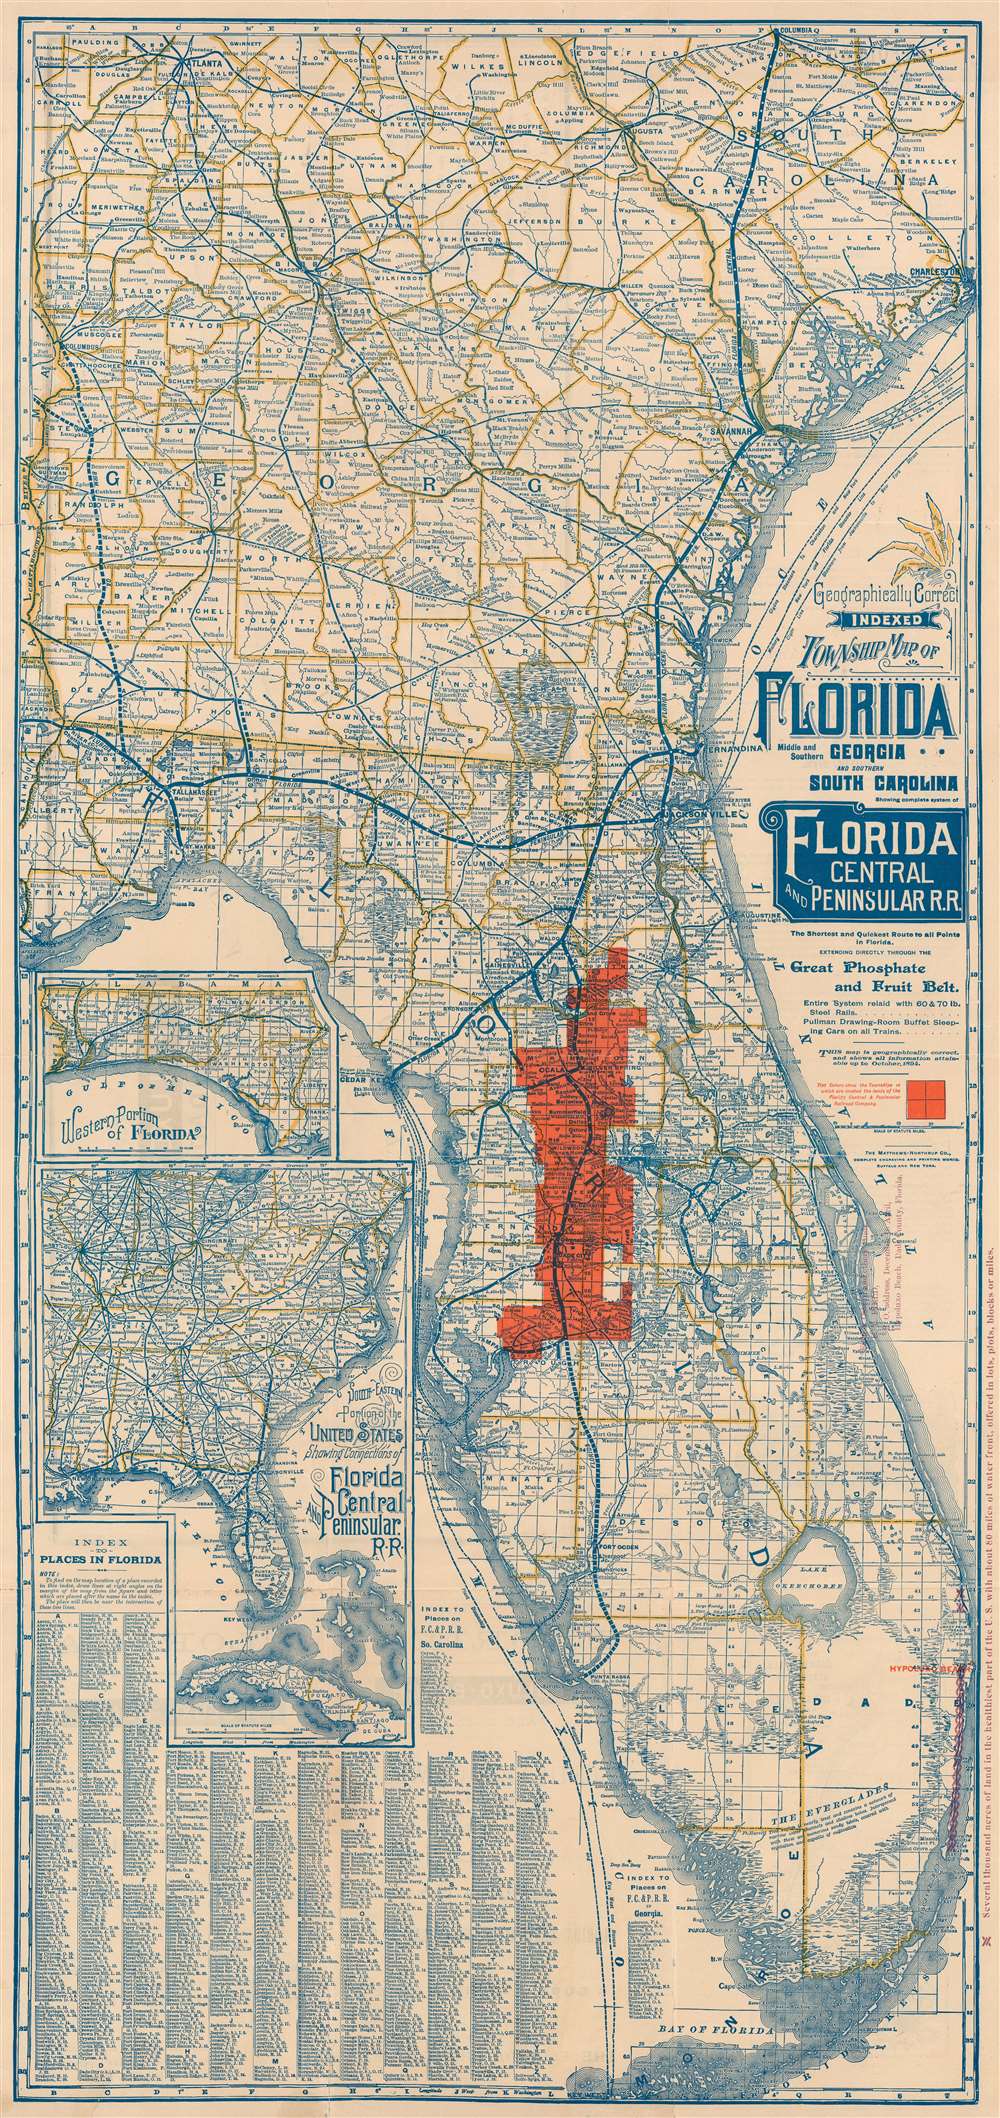 Geographically Correct Indexed Township Map of Florida, Middle and Southern Georgia, and Southern South Carolina, Showing the complete system of Florida Central and Peninsular R.R.. The shortest and Quickest Route to all Points in Florida extending directly through the Great Phosphate and Fruit Belt. - Main View